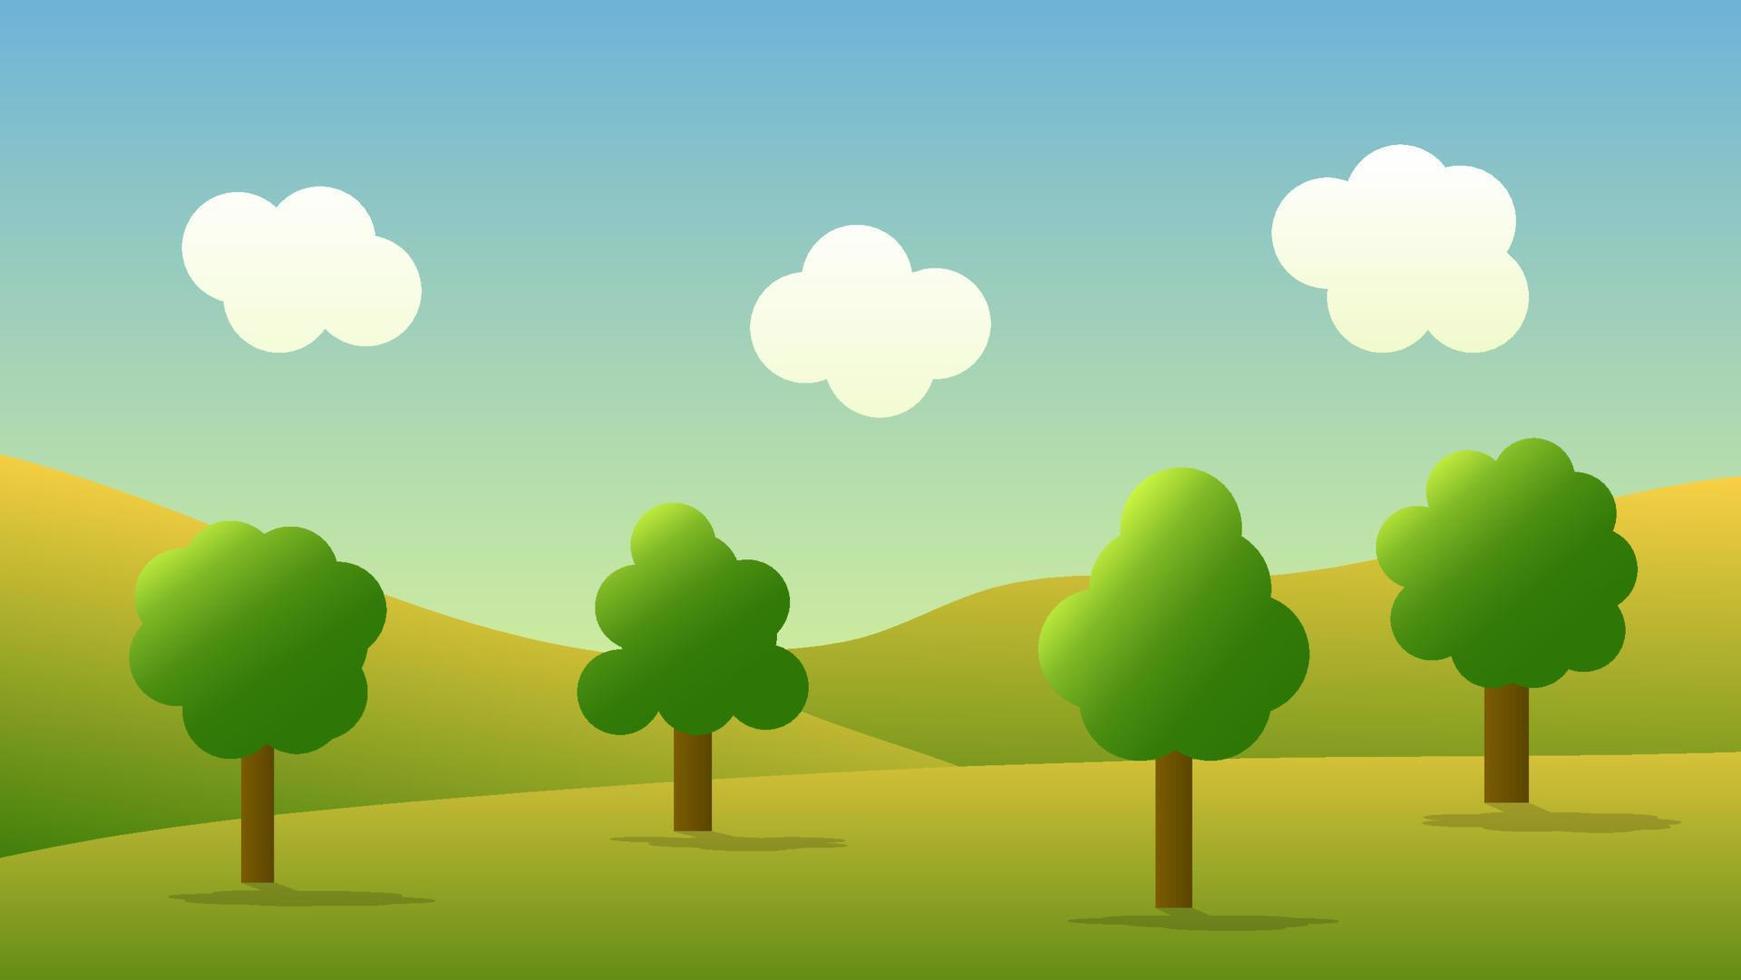 landscape cartoon scene with green trees on hills and white fluffy cloud in summer blue sky background vector